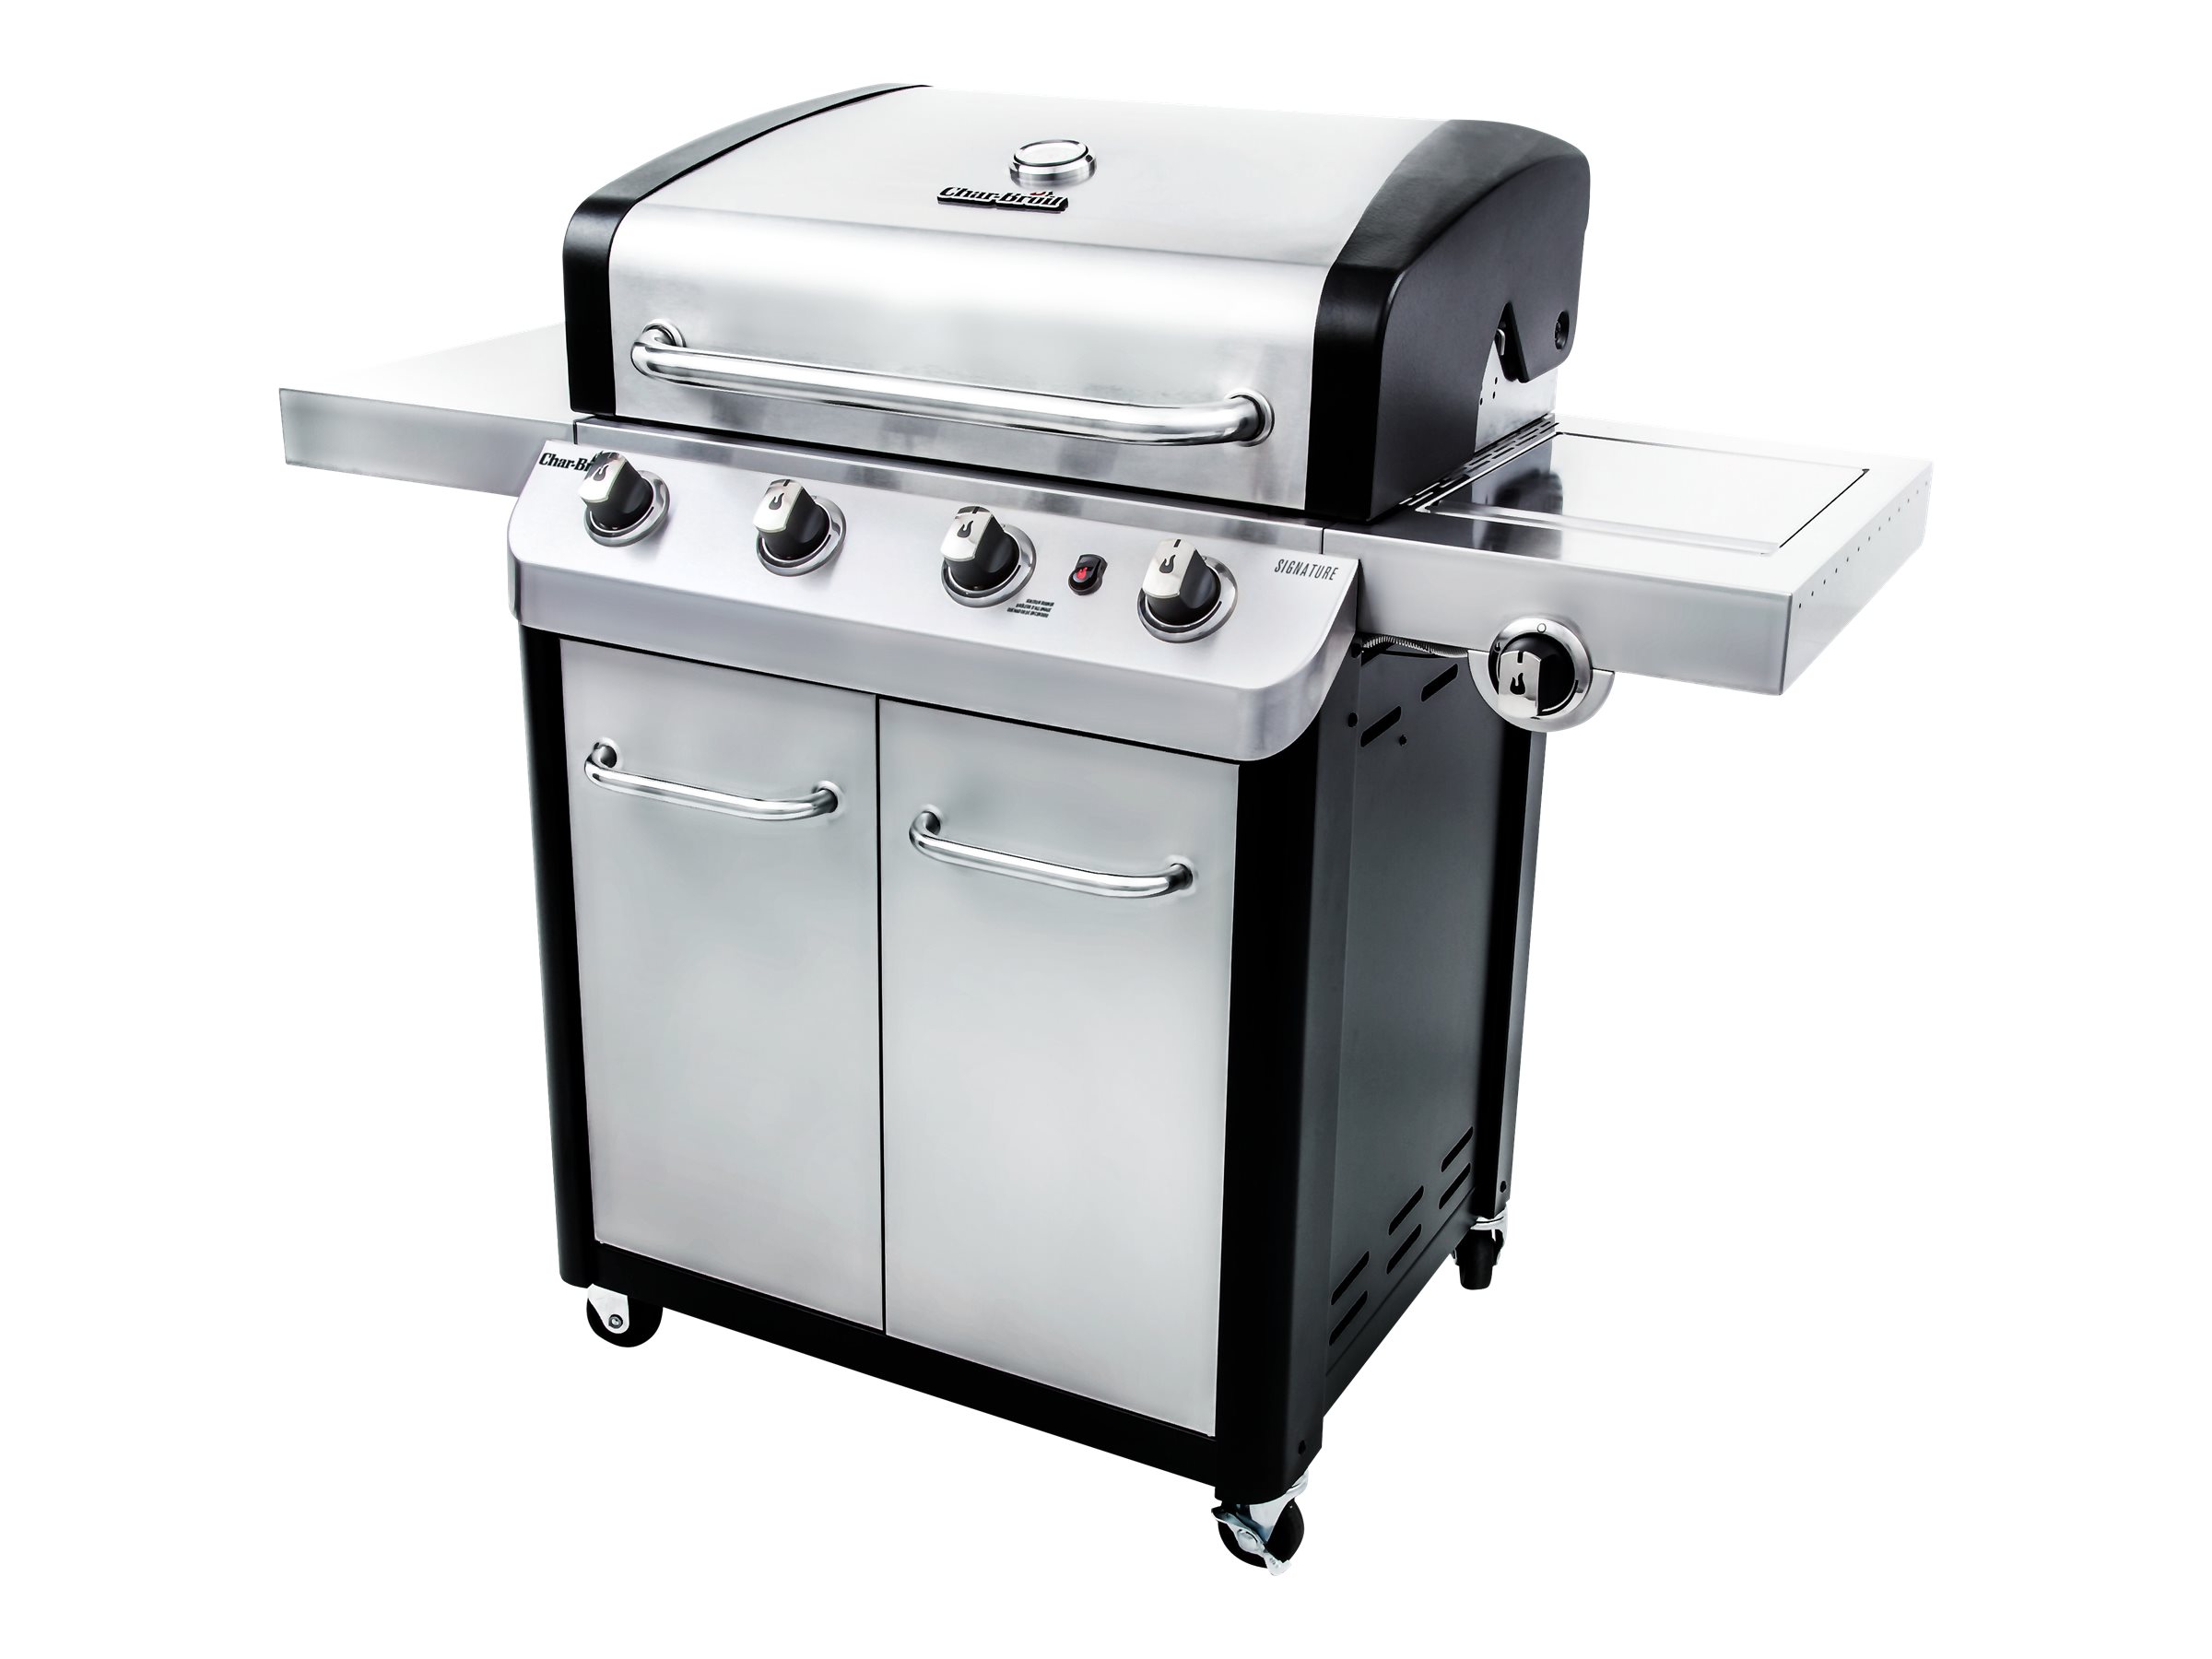 Char-Broil Signature 4-Burner Gas Grill - image 1 of 11